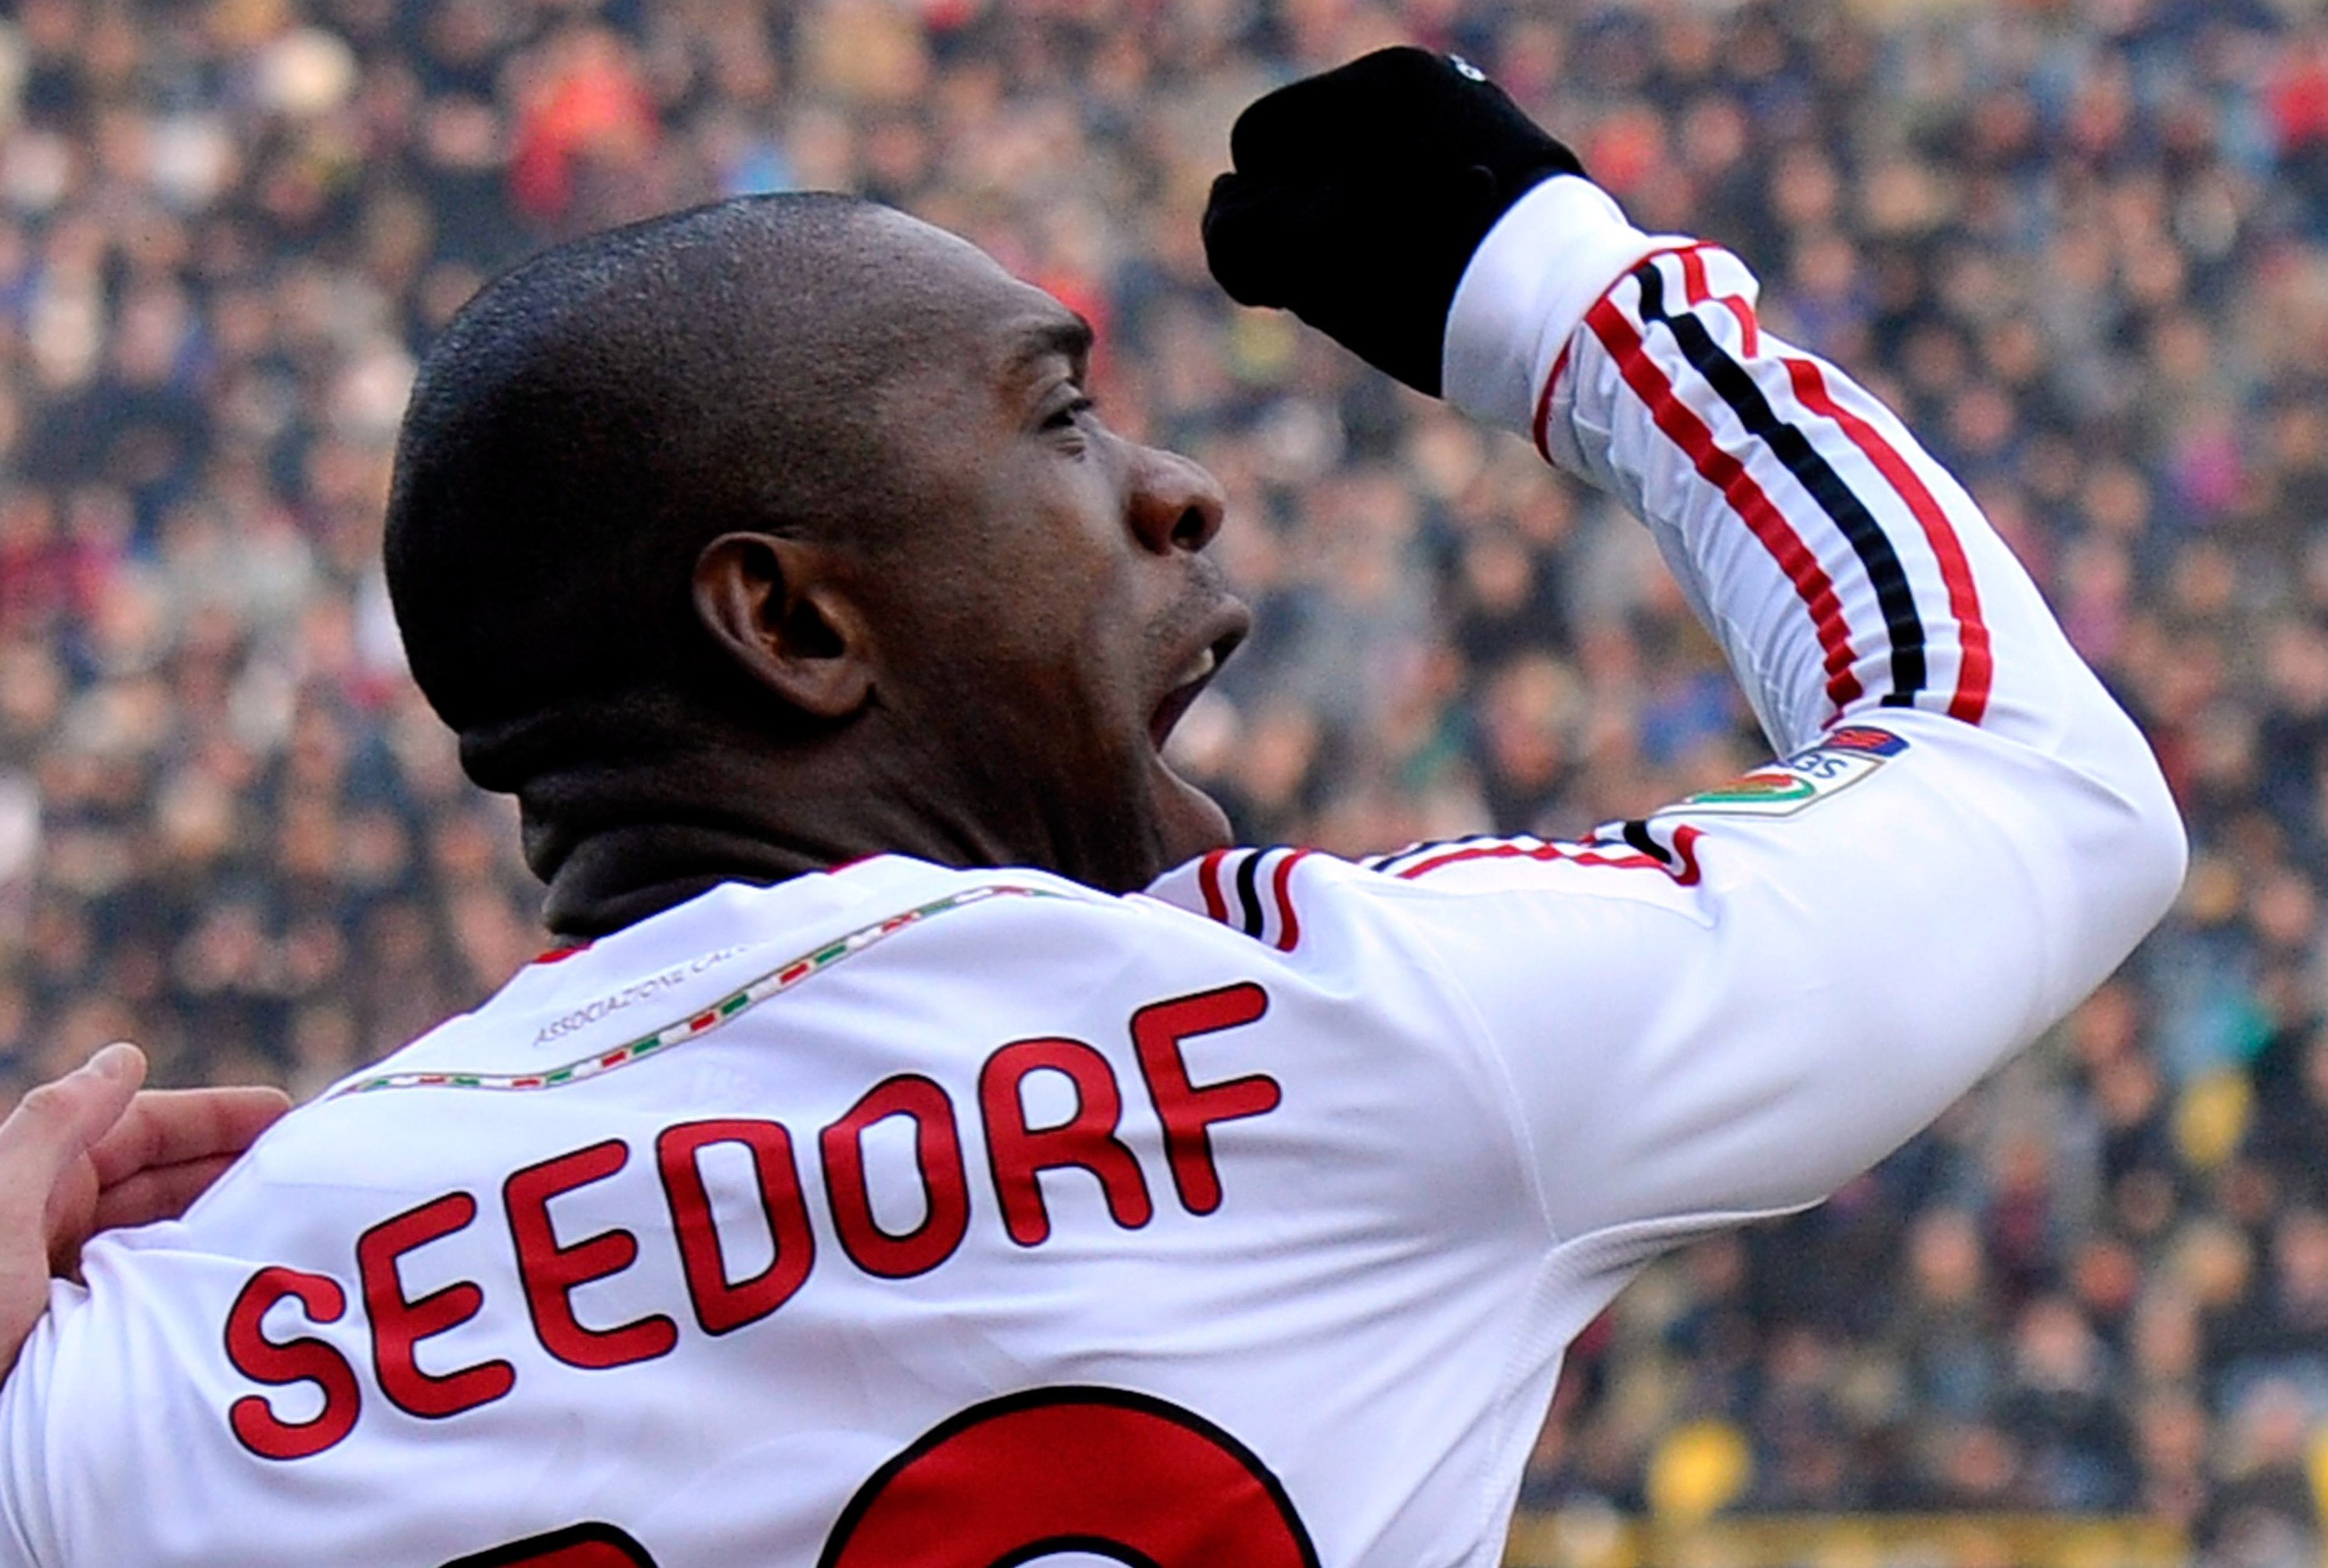  Clarence Seedorf celebrates a goal while playing for Inter Milan in a Serie A match.